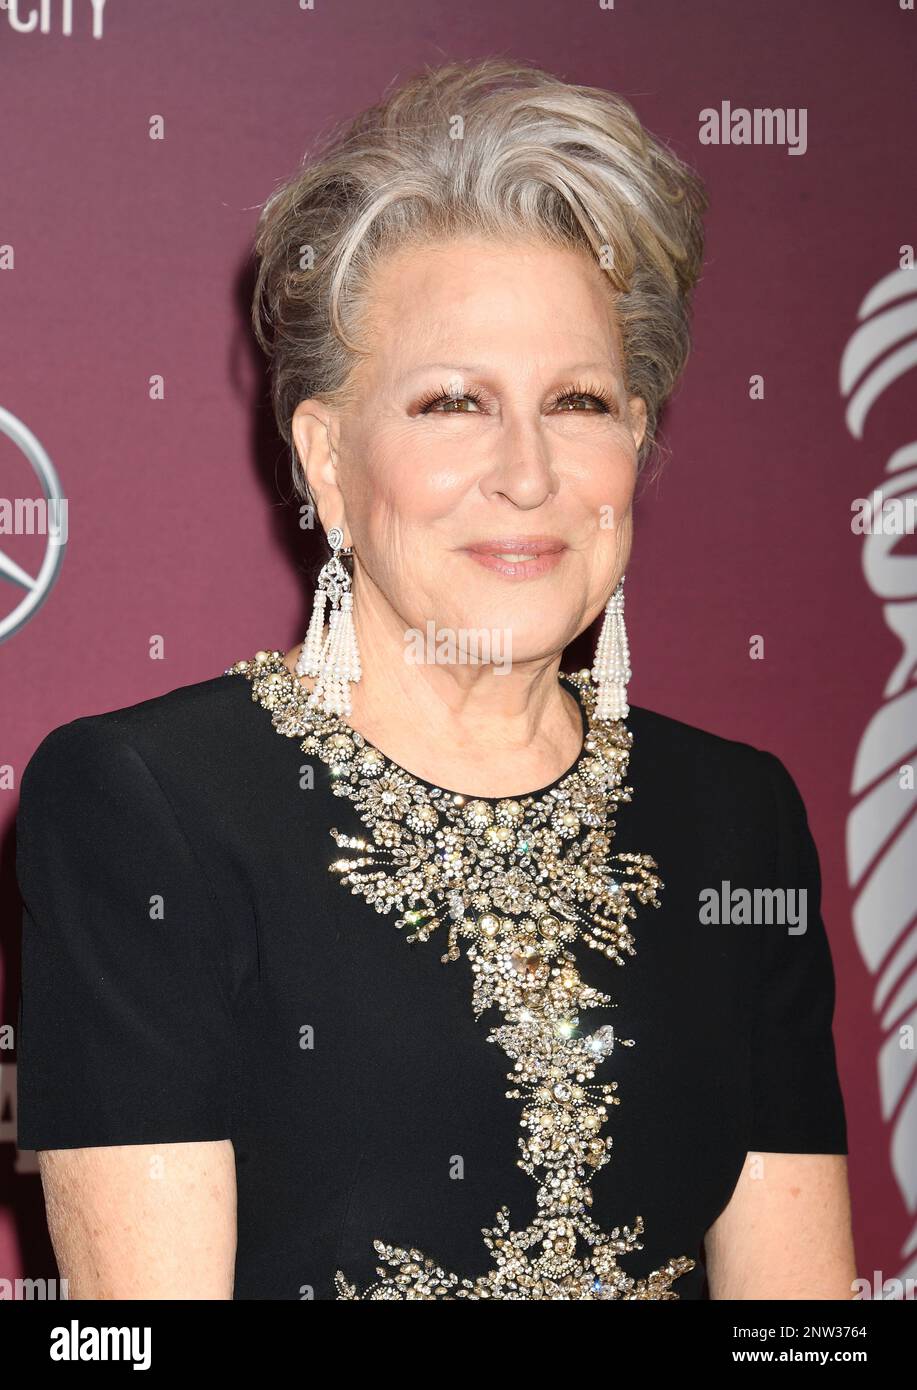 Los Angeles, California, USA. 27th Feb, 2023. Bette Midler attends the 25th Annual Costume Designers Guild Awards at the Fairmont Century Plaza on February 27, 2023 in Los Angeles, California. Credit: Jeffrey Mayer/Jtm Photos/Media Punch/Alamy Live News Stock Photo